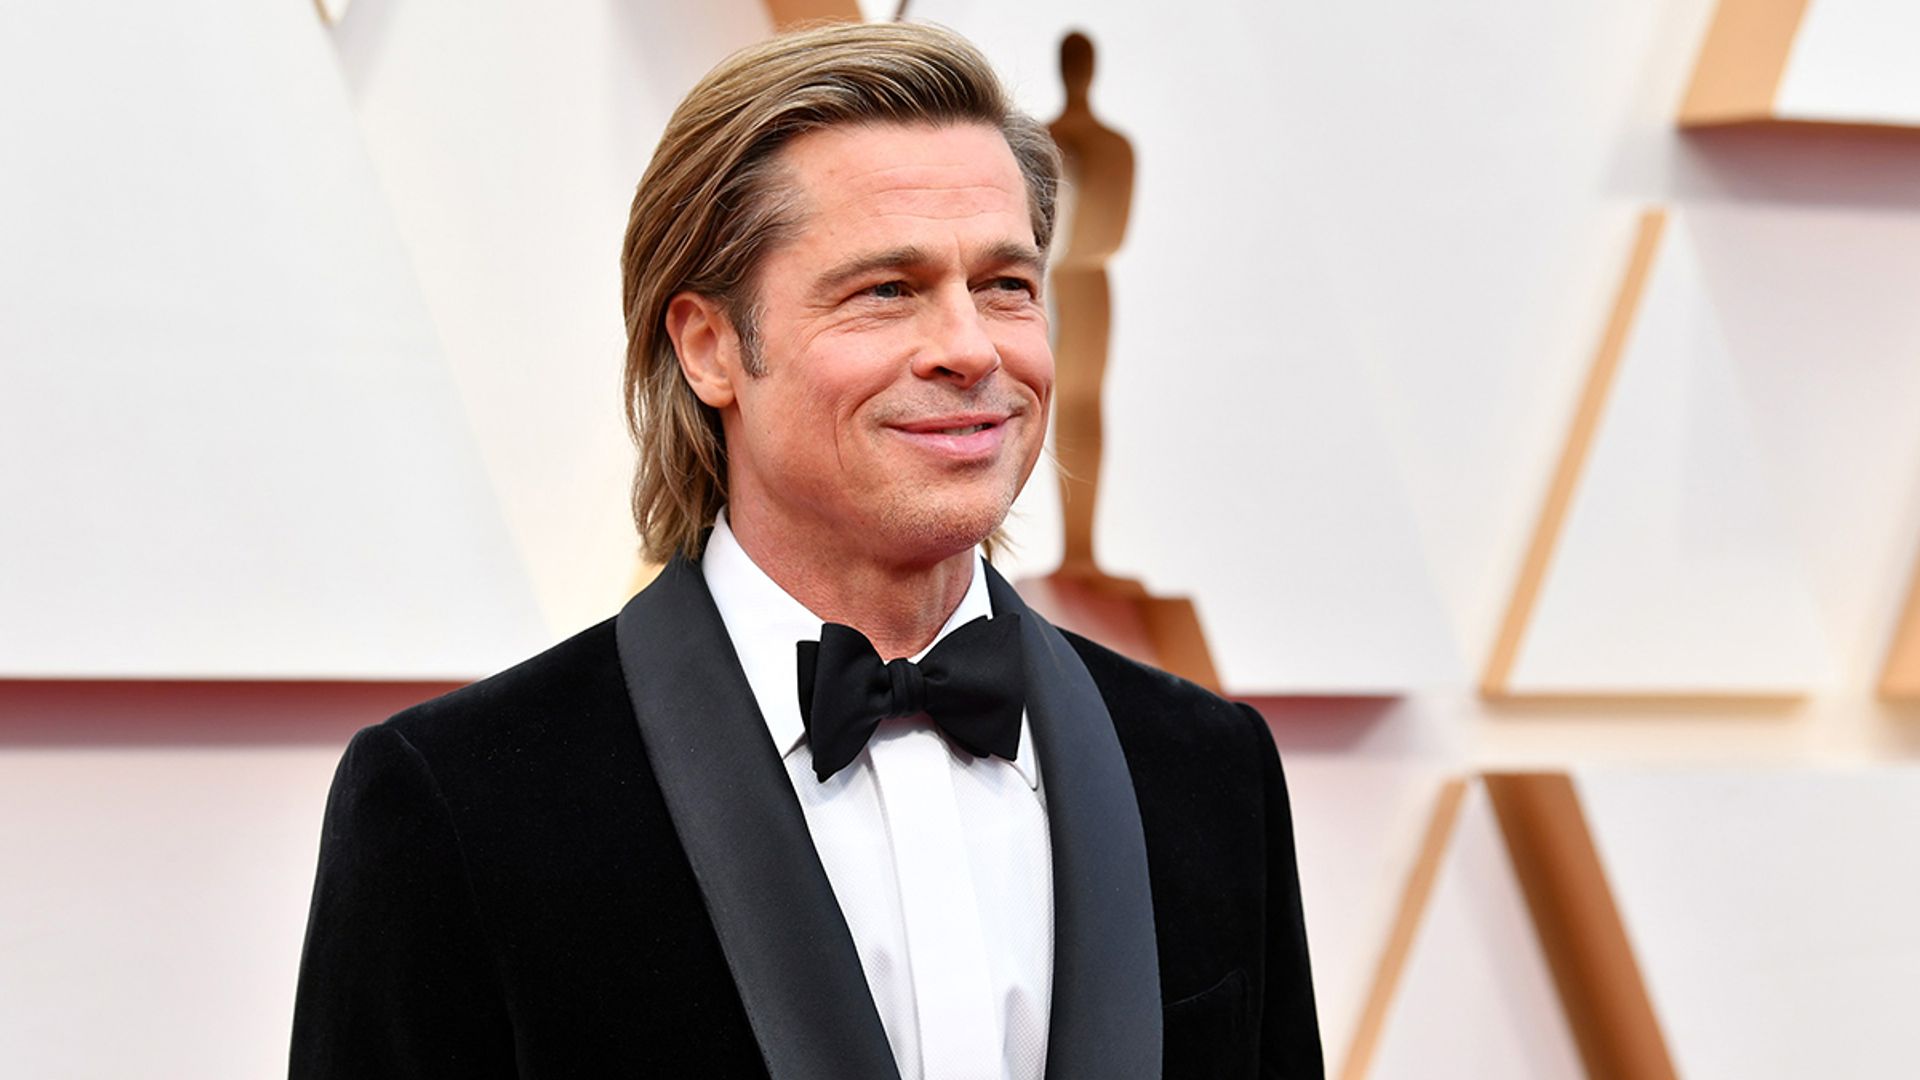 Who was Brad Pitt's mystery date at the 2020 Oscars?